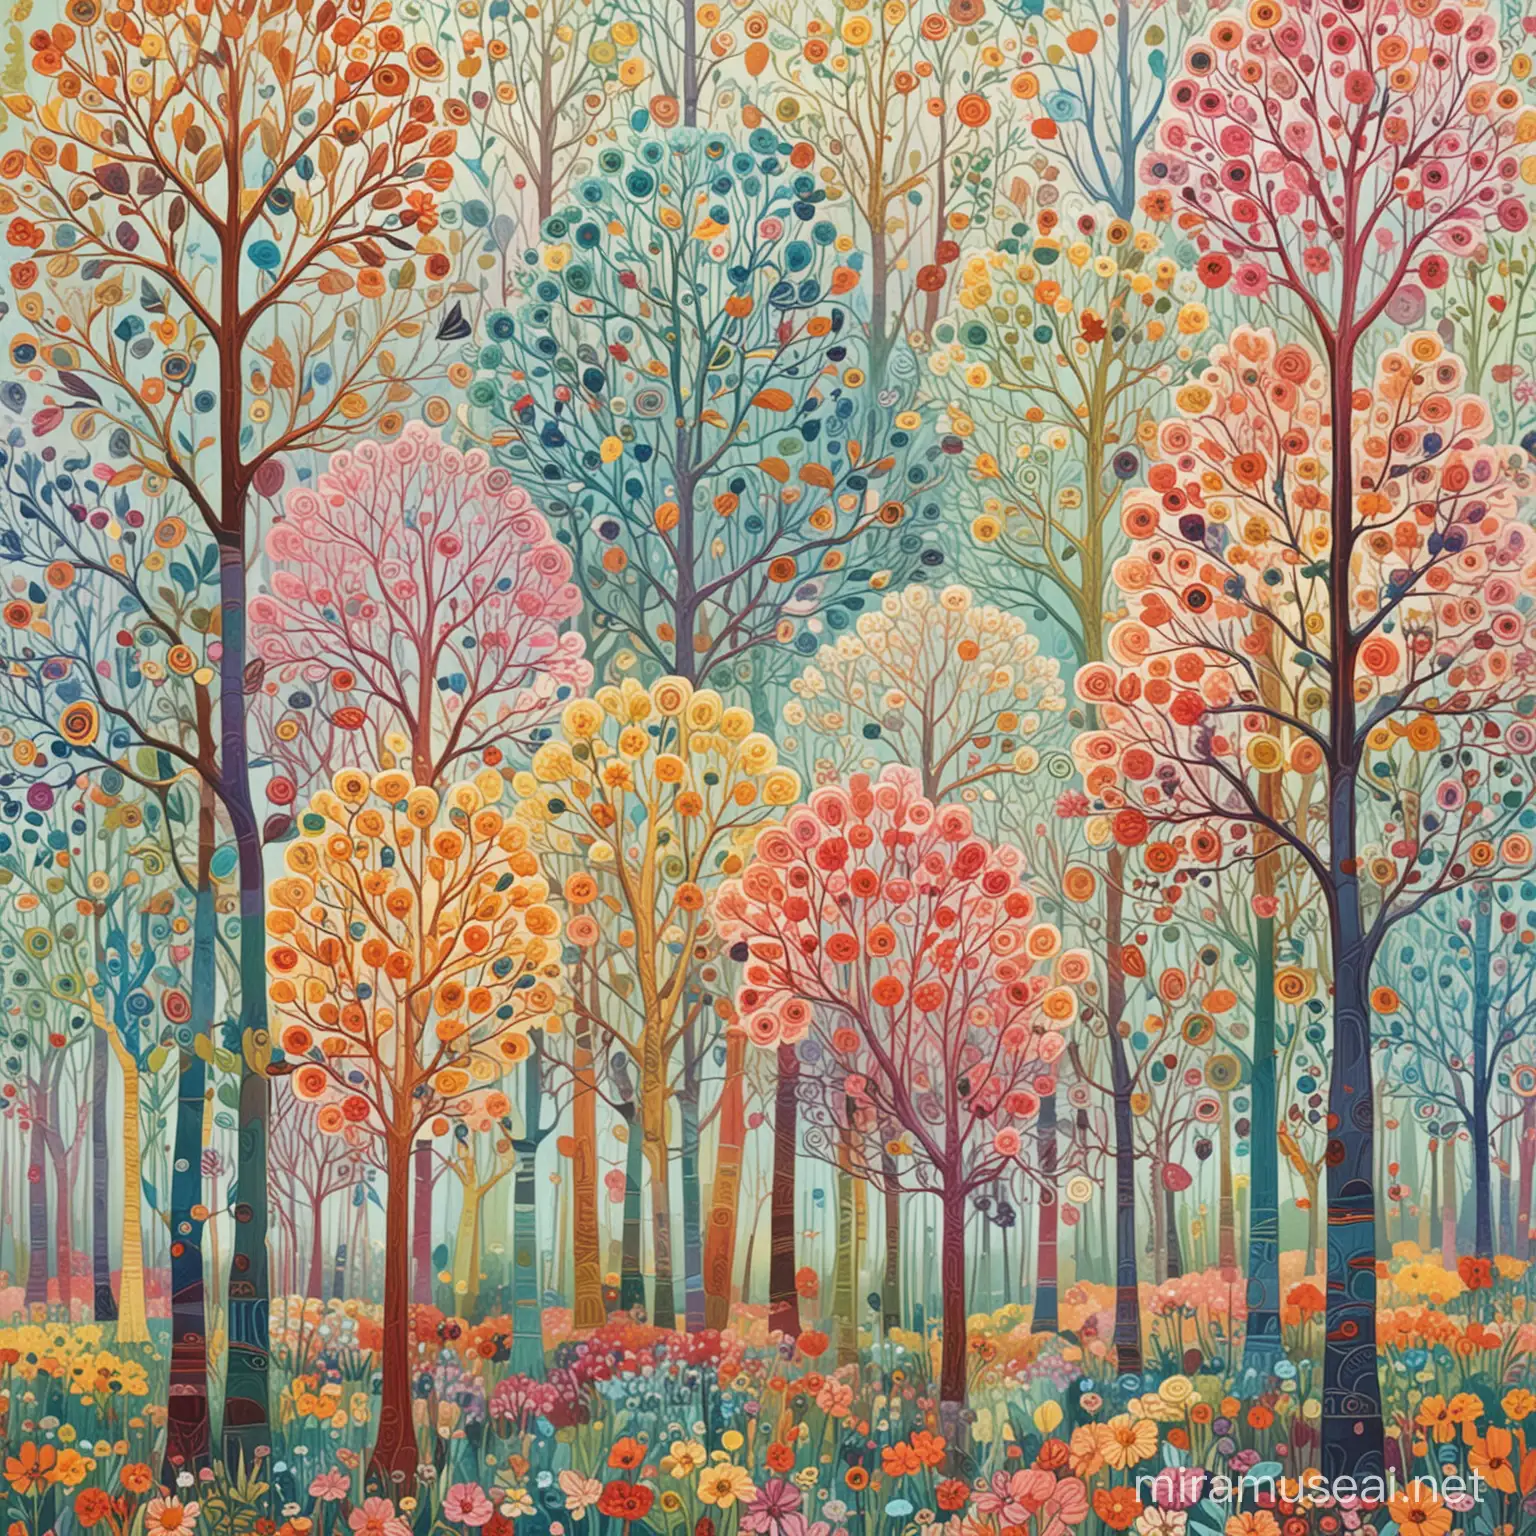 Rainbow Forest Whmisical Art, soft colors, soft lines, delicate, naive art colorful trees and flowers